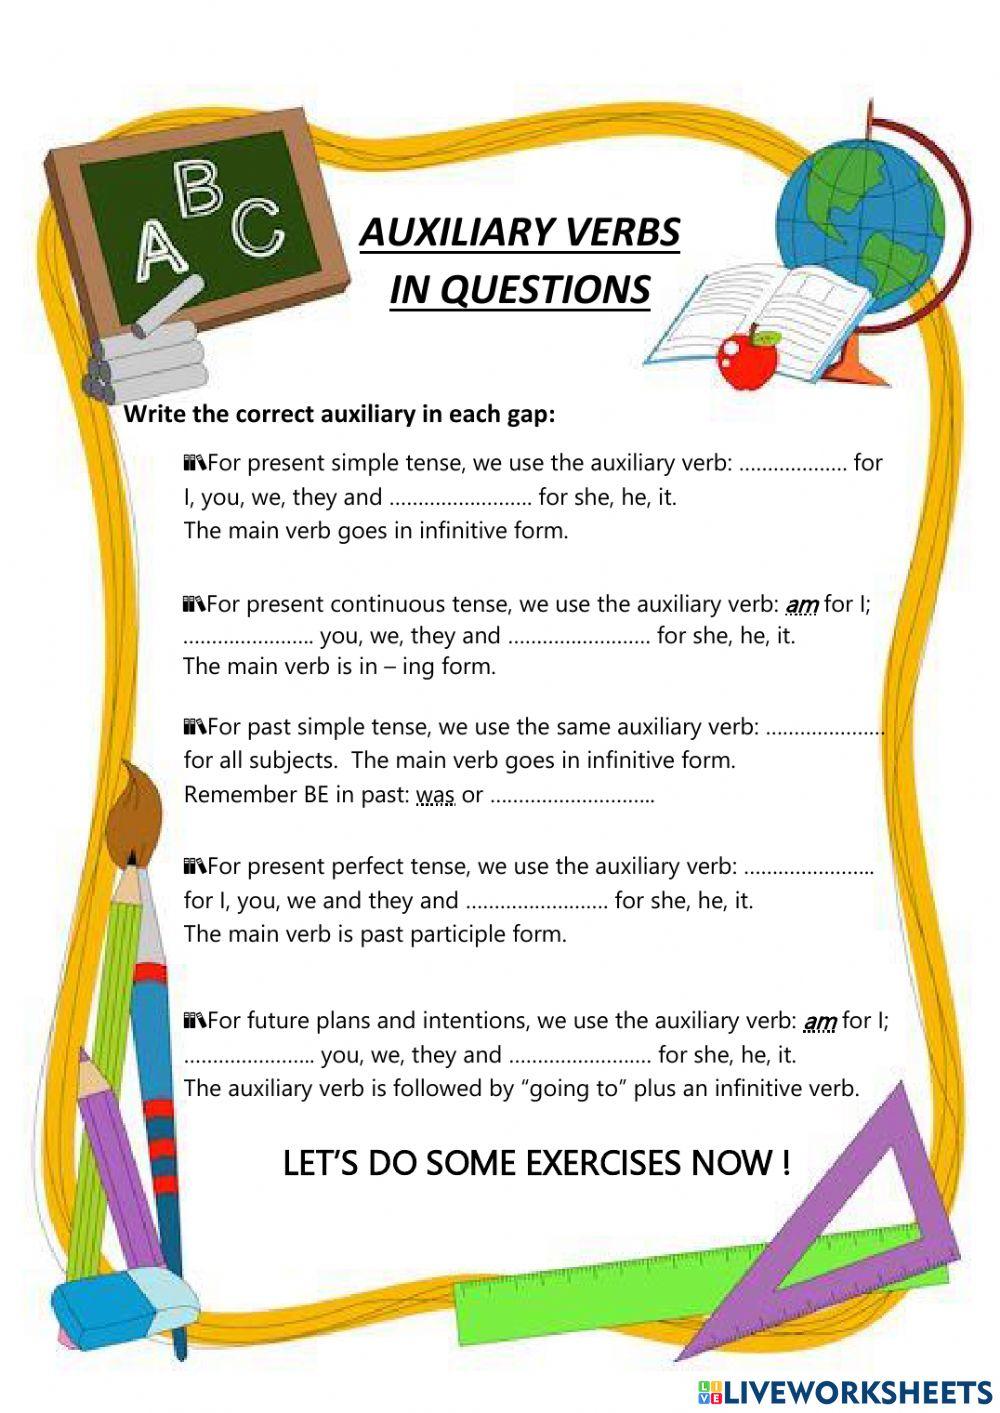 Auxiliary verbs in questions